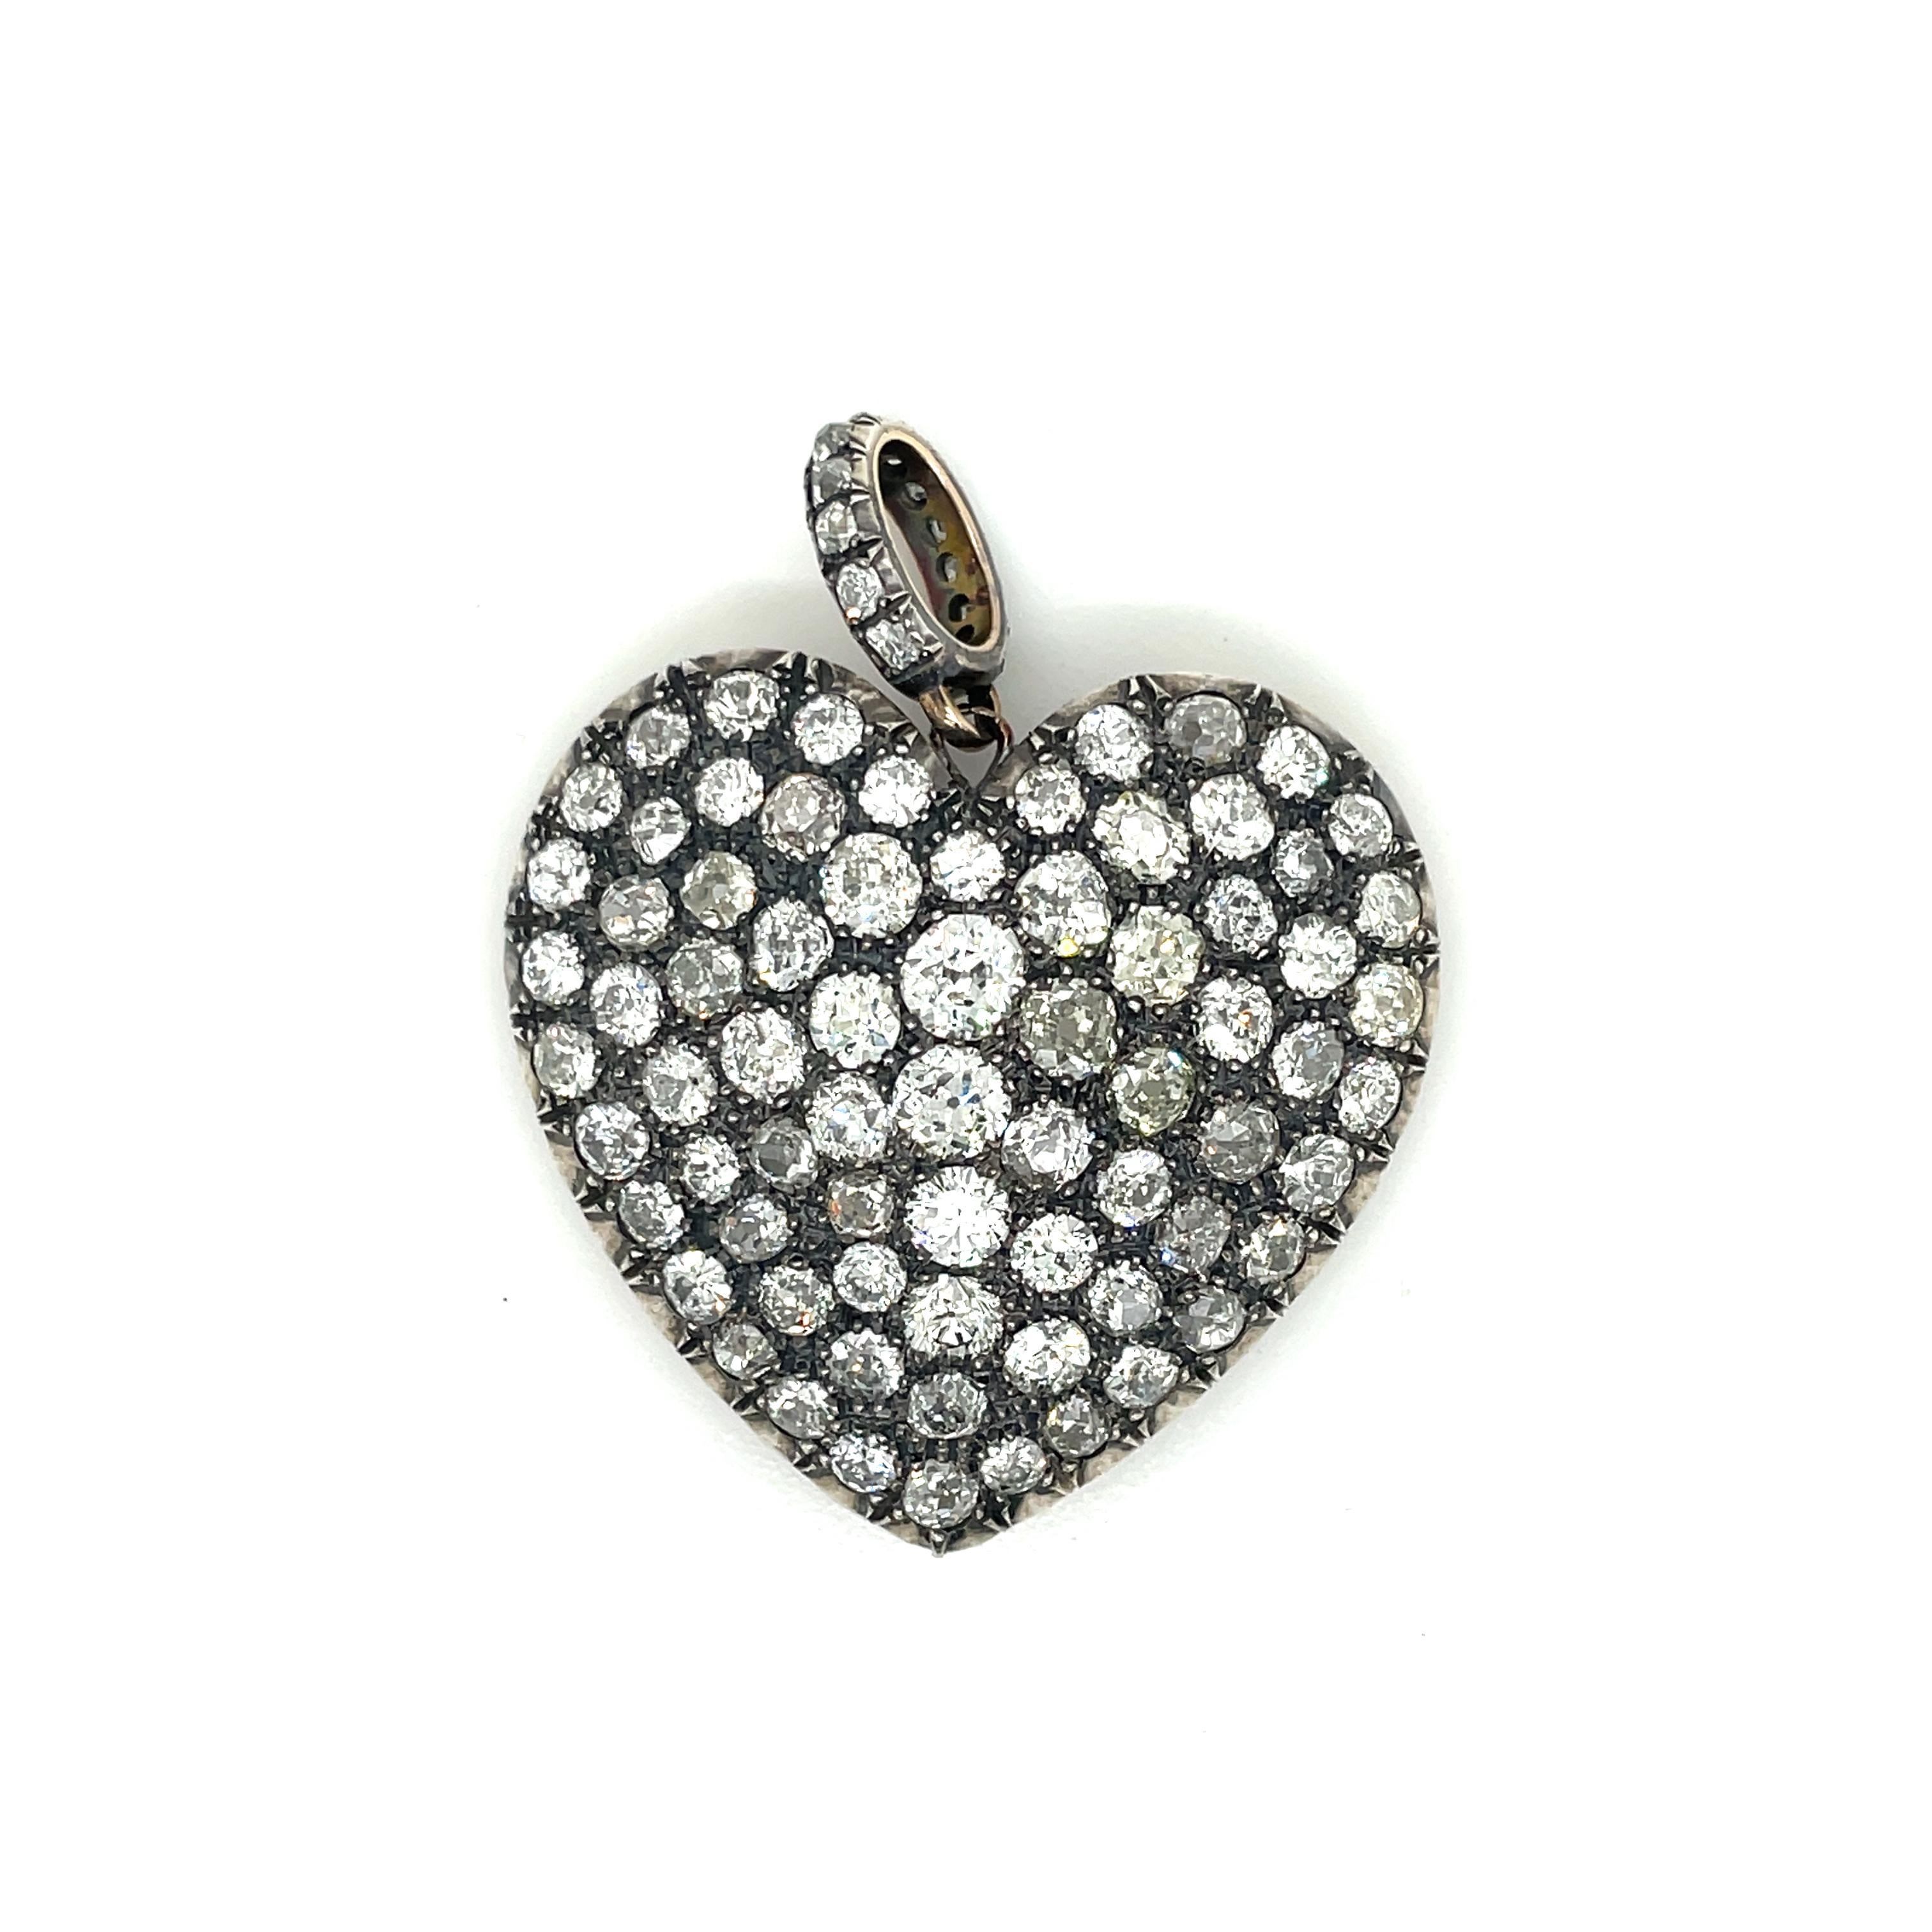 Delightful heart-shaped pendant handmade in 18 kt gold and silver in the late 1970s in Italy. Set with approximately 80 round old mine cut diamonds (VS clarity - H-I-J color) for a total of approximately 15.00 ct.

CONDITION: Pre-owned -